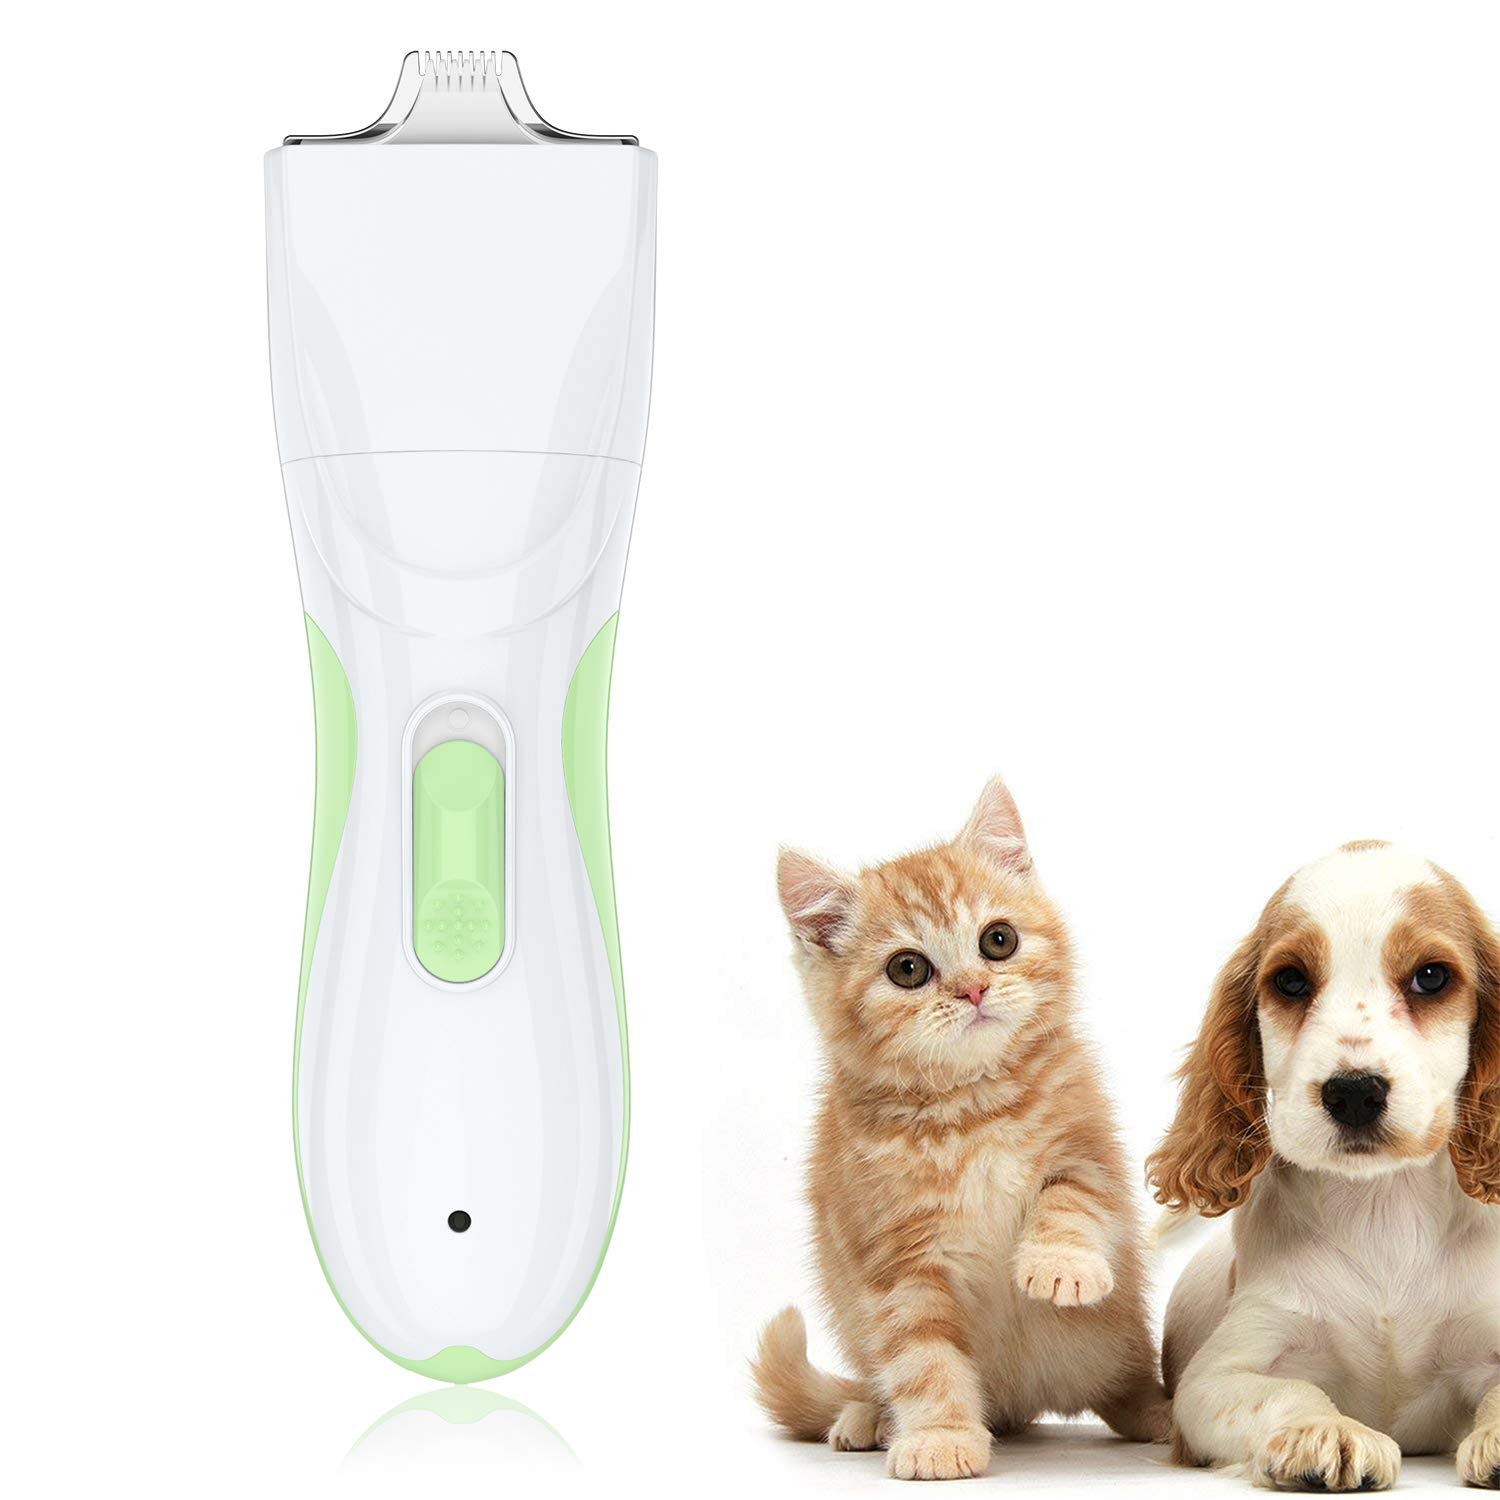 Book Cover TURN RAISE Professional Dog Grooming Clippers,Washable Dog Shaver Clippers Low Noise Rechargeable Electric Quiet Dog Hair Clipper with Detachable Ceramic Blade for Dogs and Cats,Eyes,Face,Ears,Paw